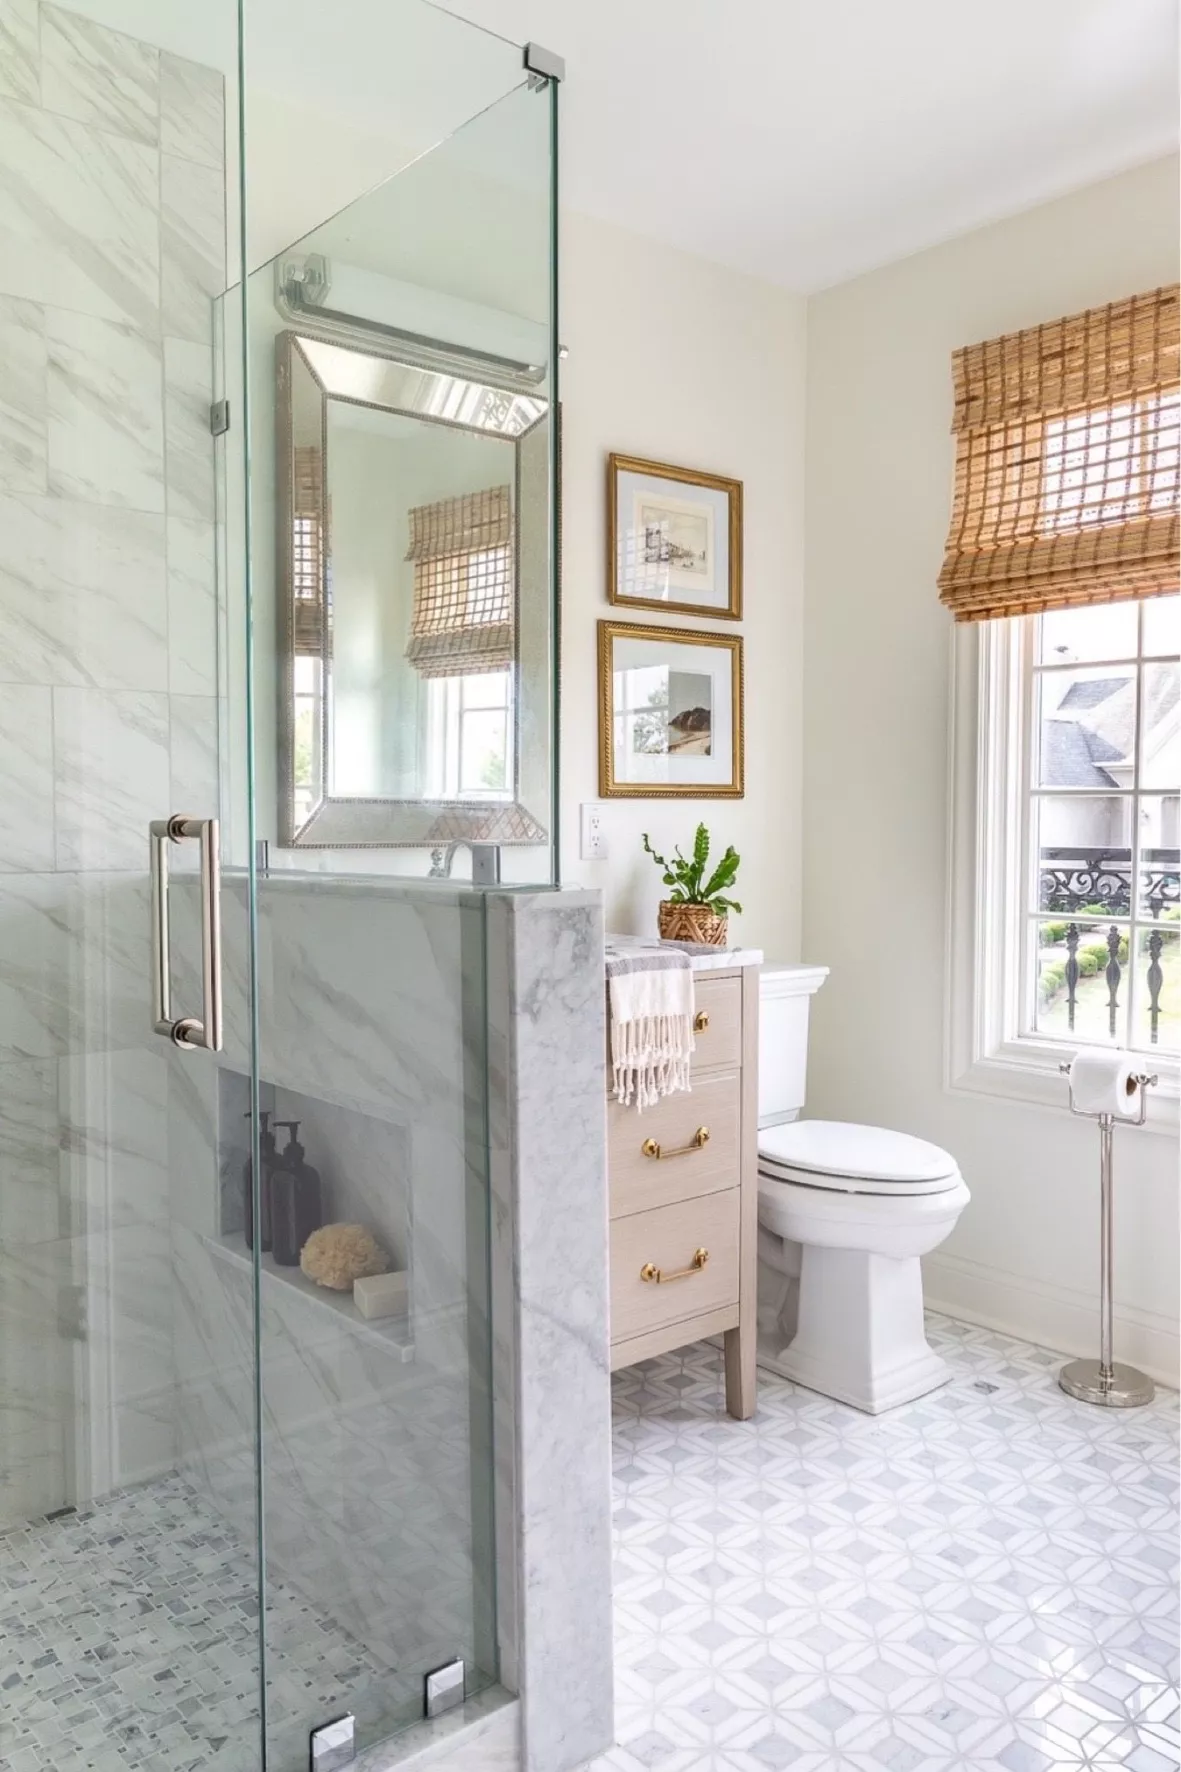 How to Remodel a Bathroom - The Home Depot